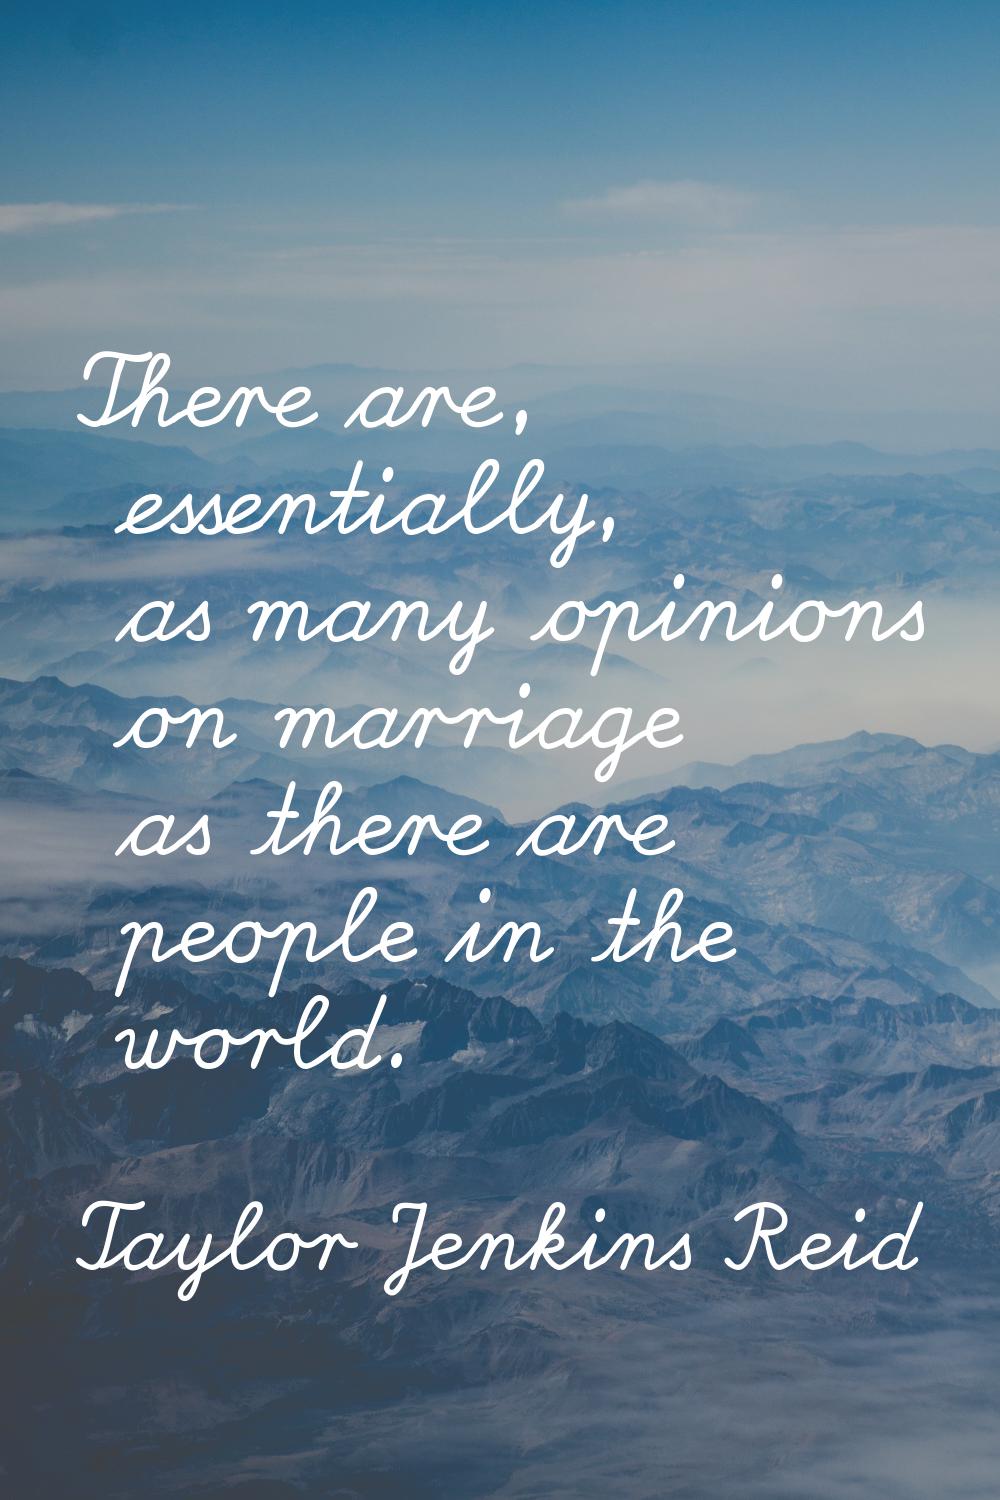 There are, essentially, as many opinions on marriage as there are people in the world.